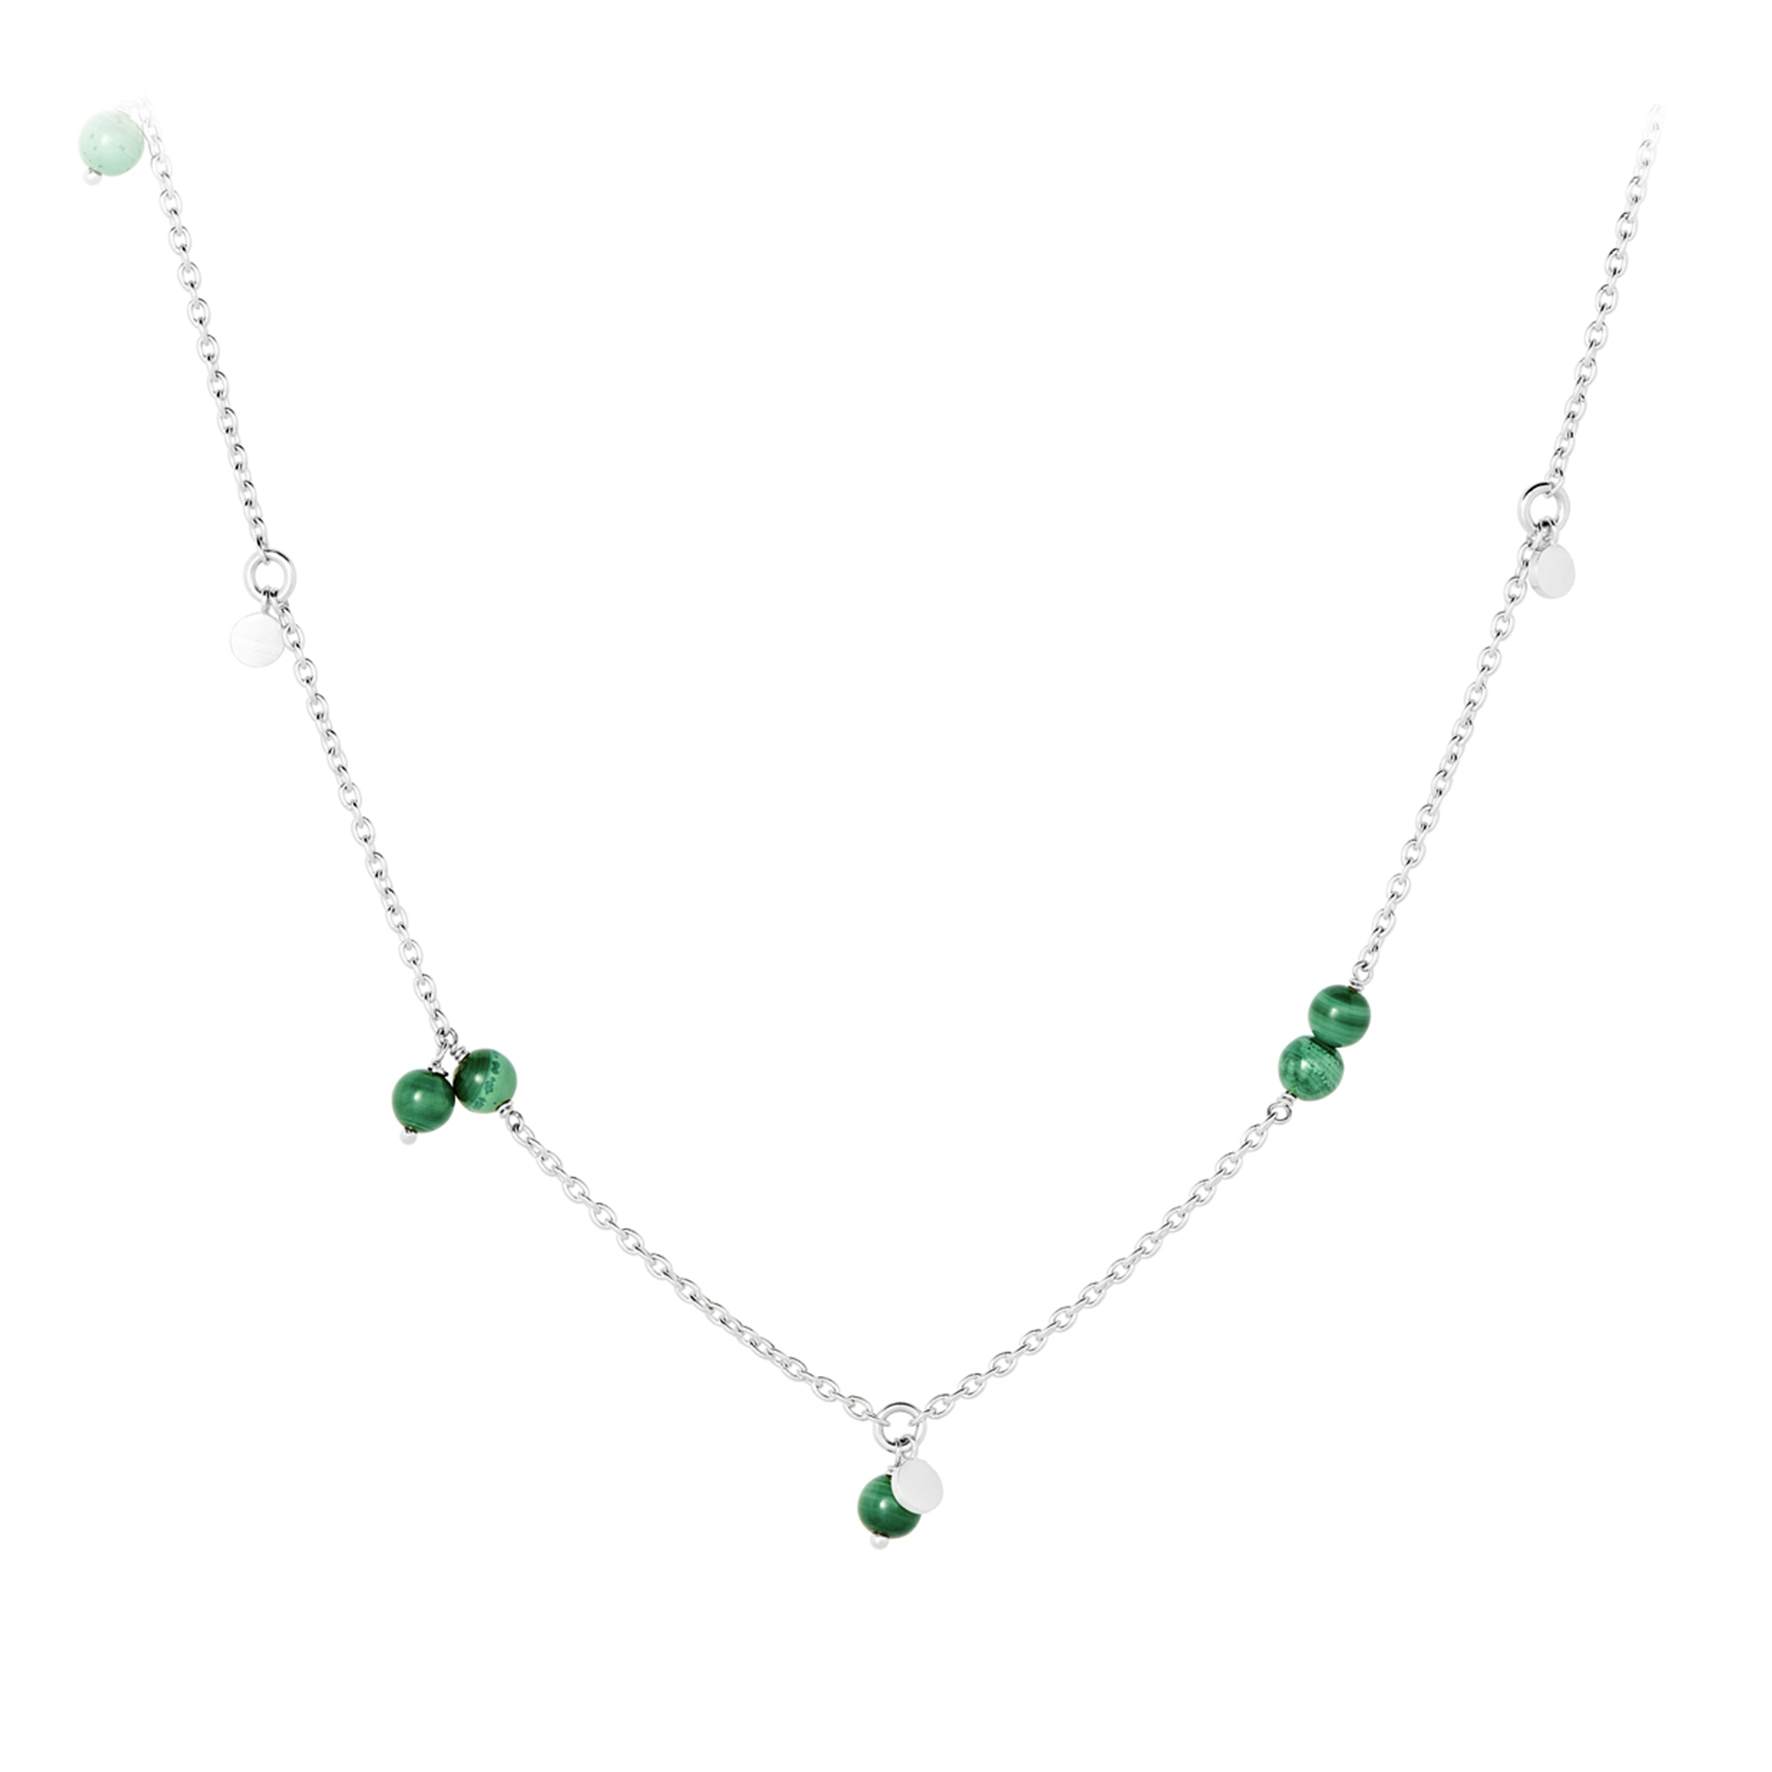 Forest Necklace from Pernille Corydon in Silver Sterling 925